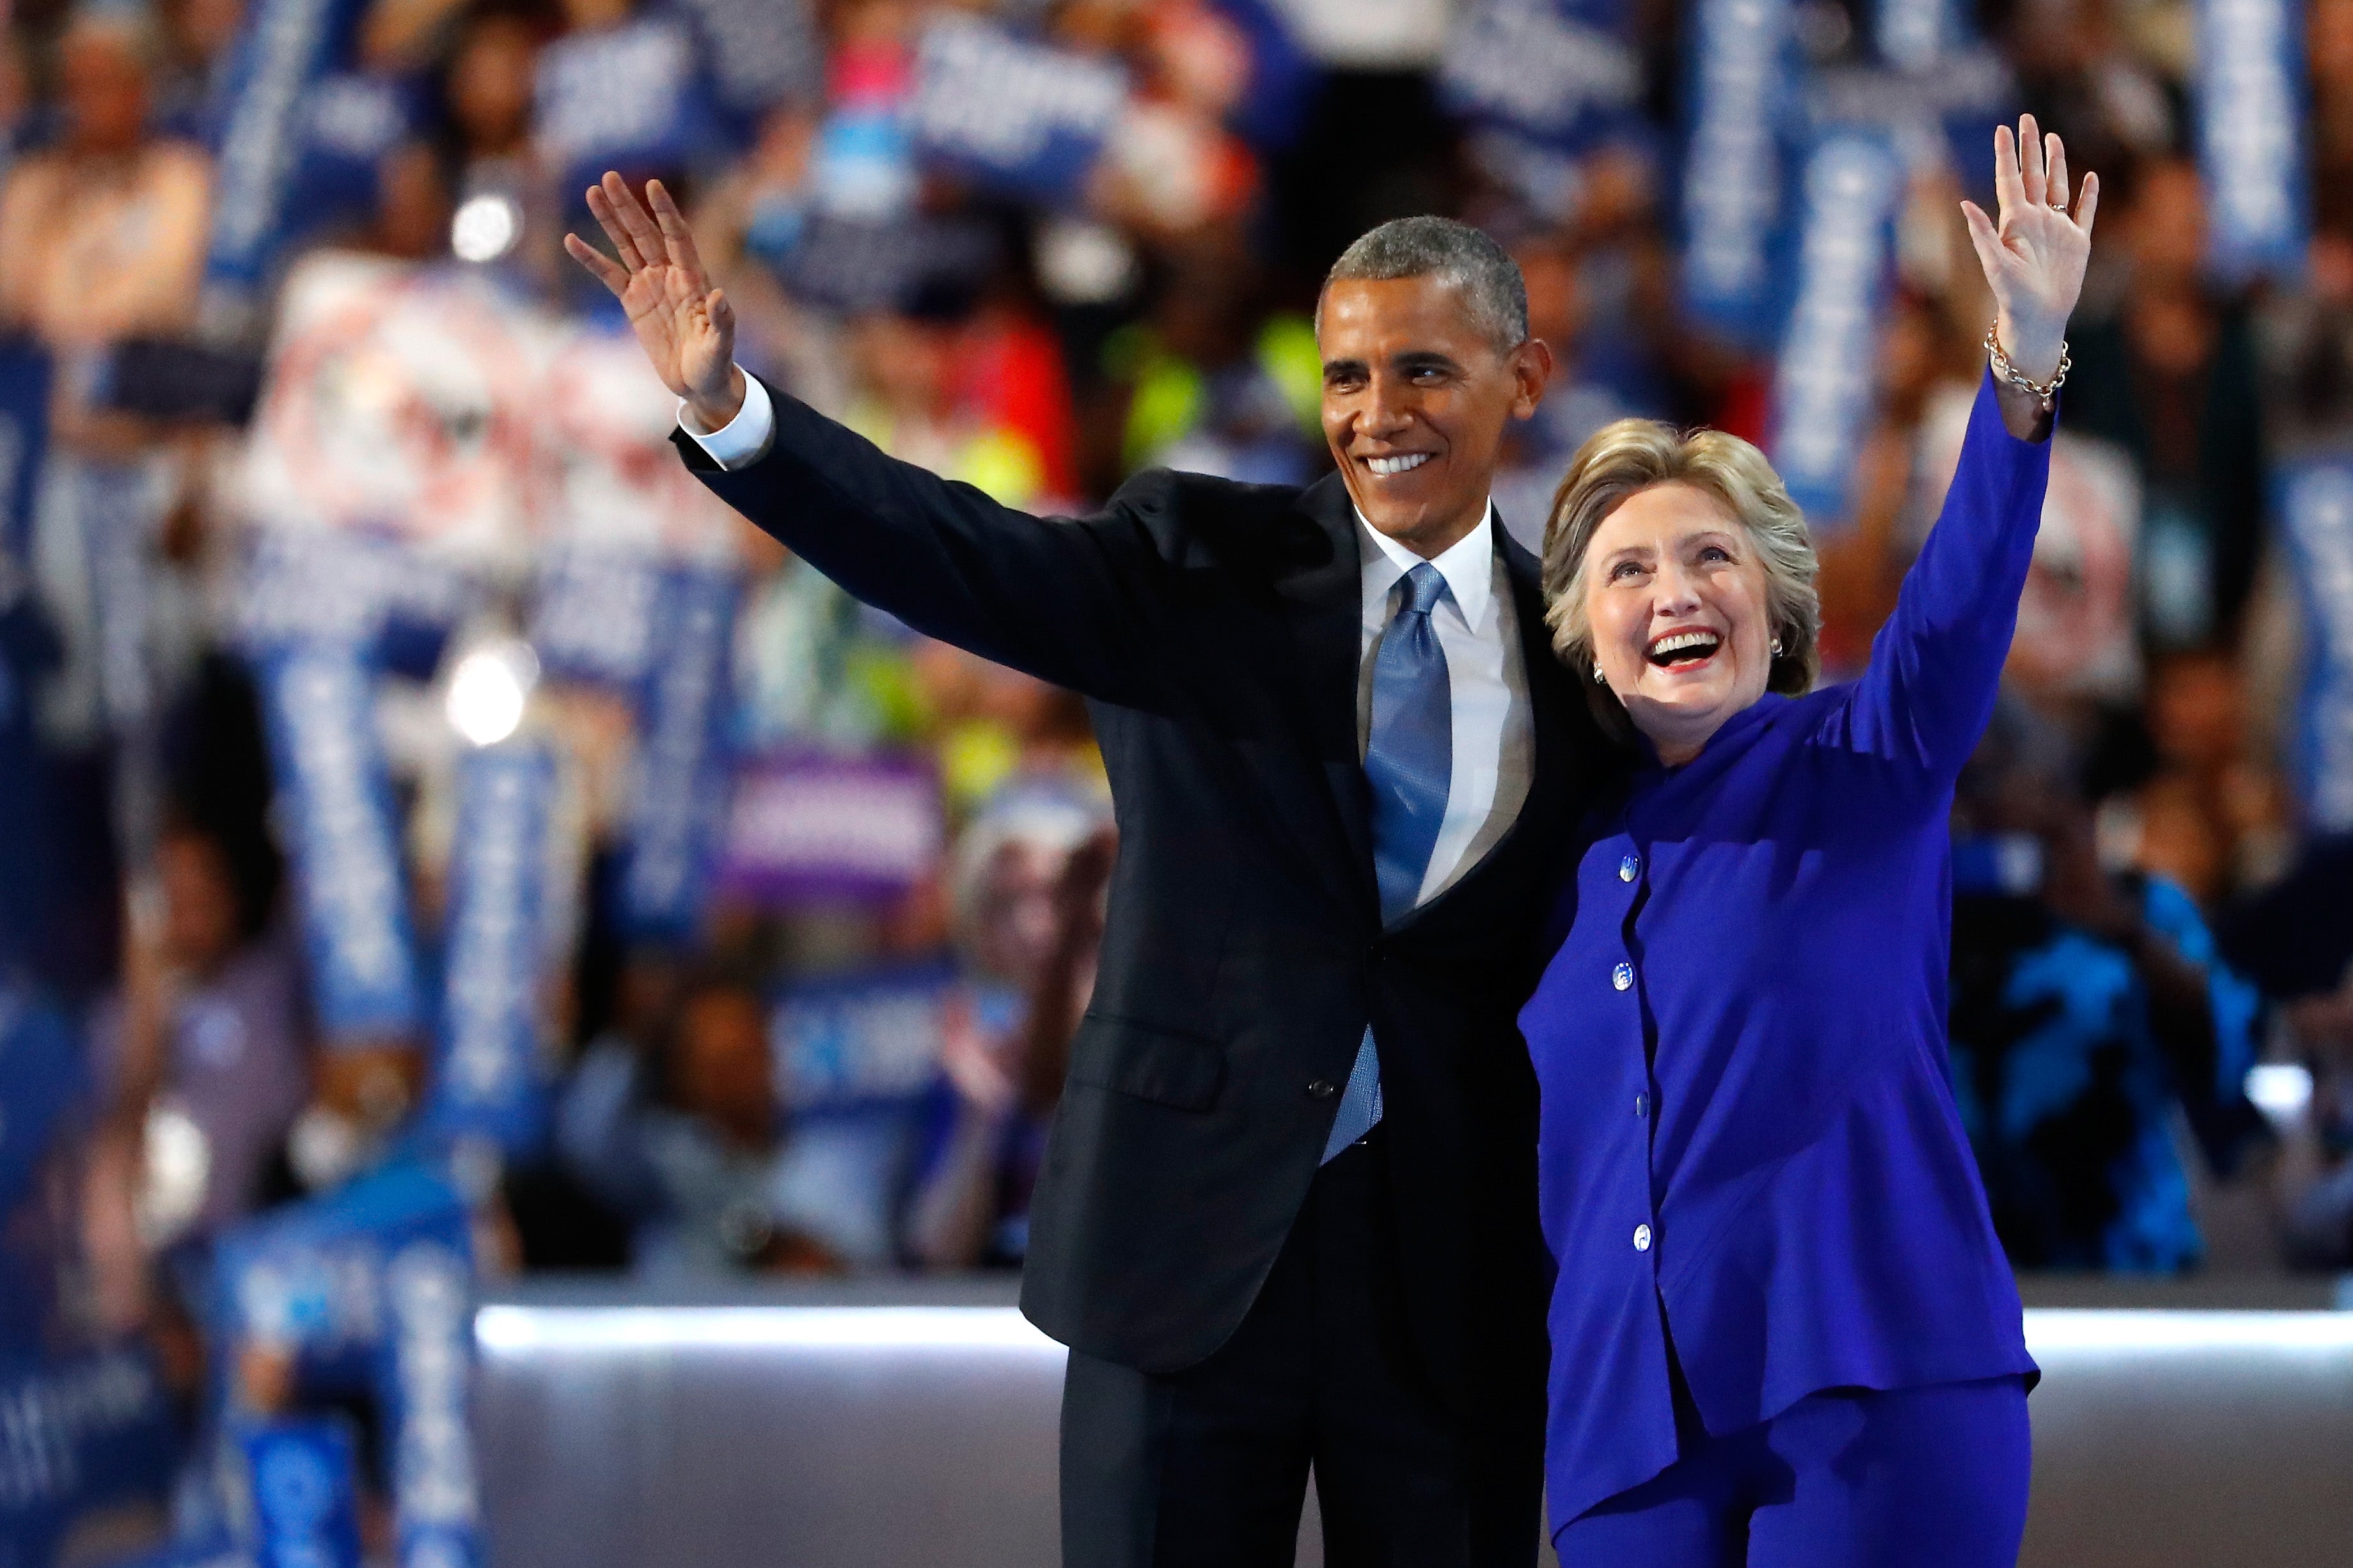 President Obama Delivers Powerful Endorsement of Hillary Clinton at DNC